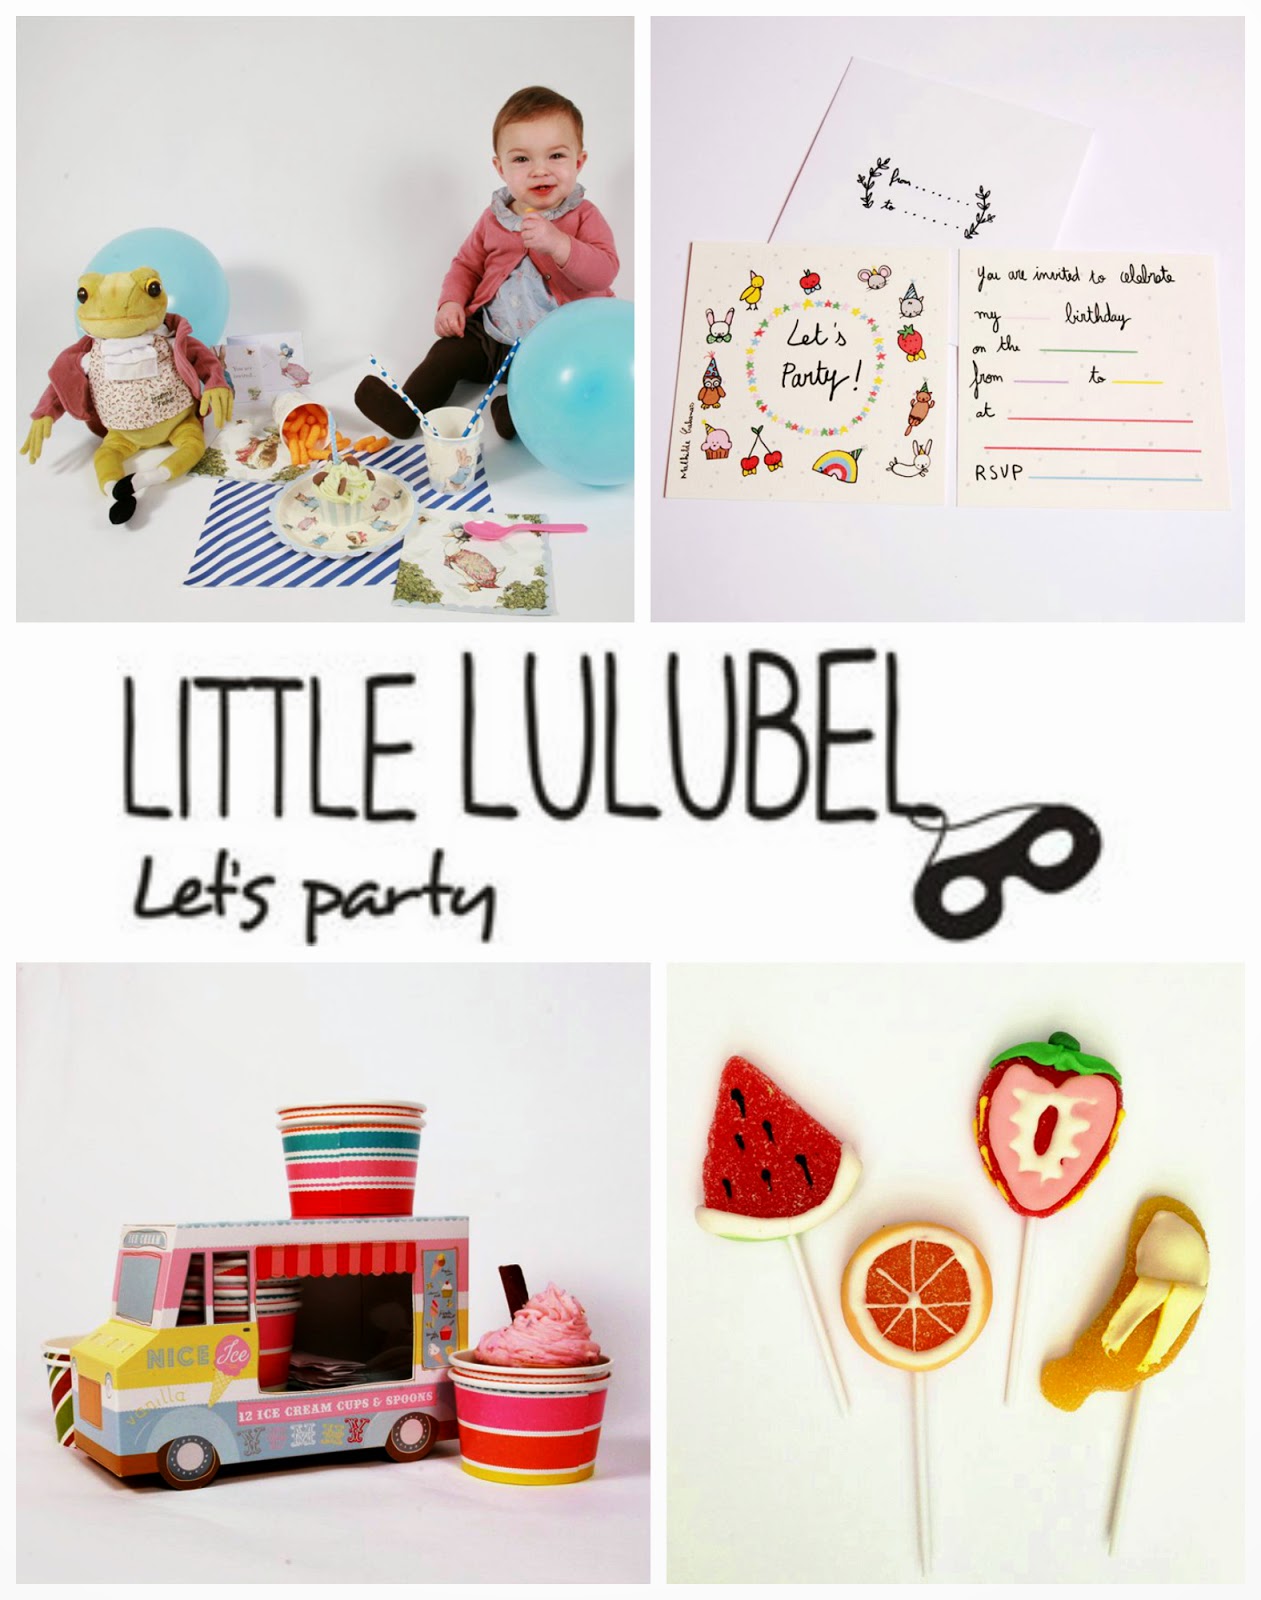 My top 5 party supply shops for kids birthdays | mamasVIB | party supplies | kids birhtdays | The Carousel show | pretty little party shop | jelly & Blancmange | Little lulubel | the little things | pretty little things | party decorations | party plates | balloons | kids birthdays | party time | party packs | its | birthday | peter rabbit | first birthday | confetti | candles | mamasVIb | bonita Turner | top party shops | party planning | children's parties | VIb 